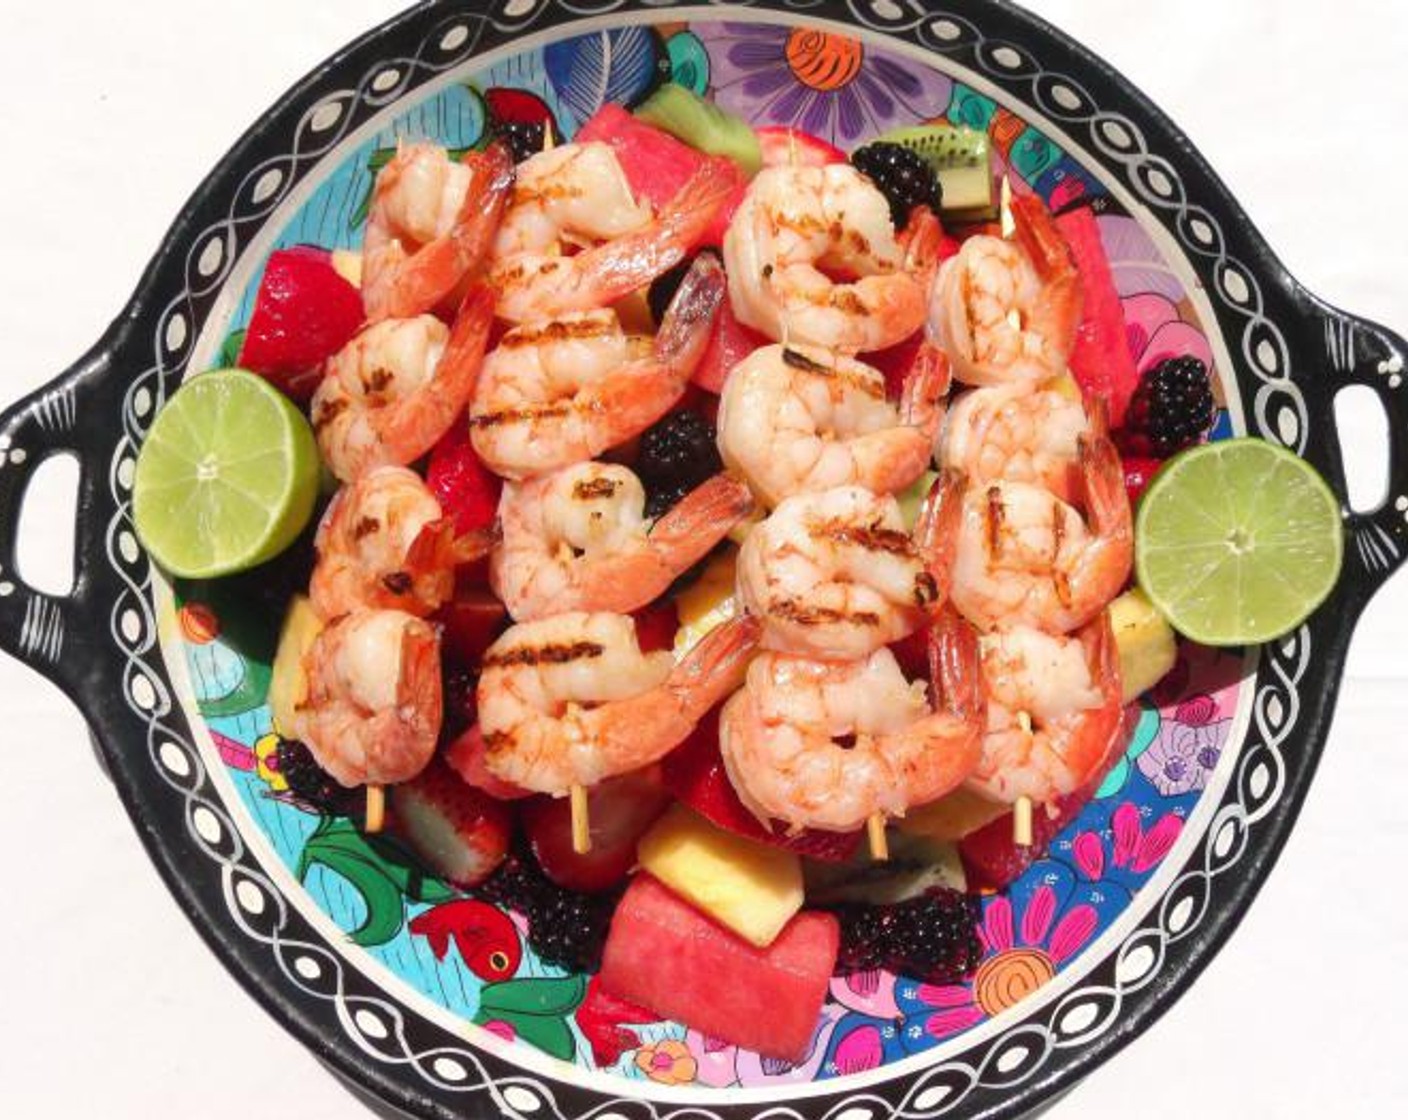 Grilled Shrimp Brochettes on Honey and Rum Macerated Fruits